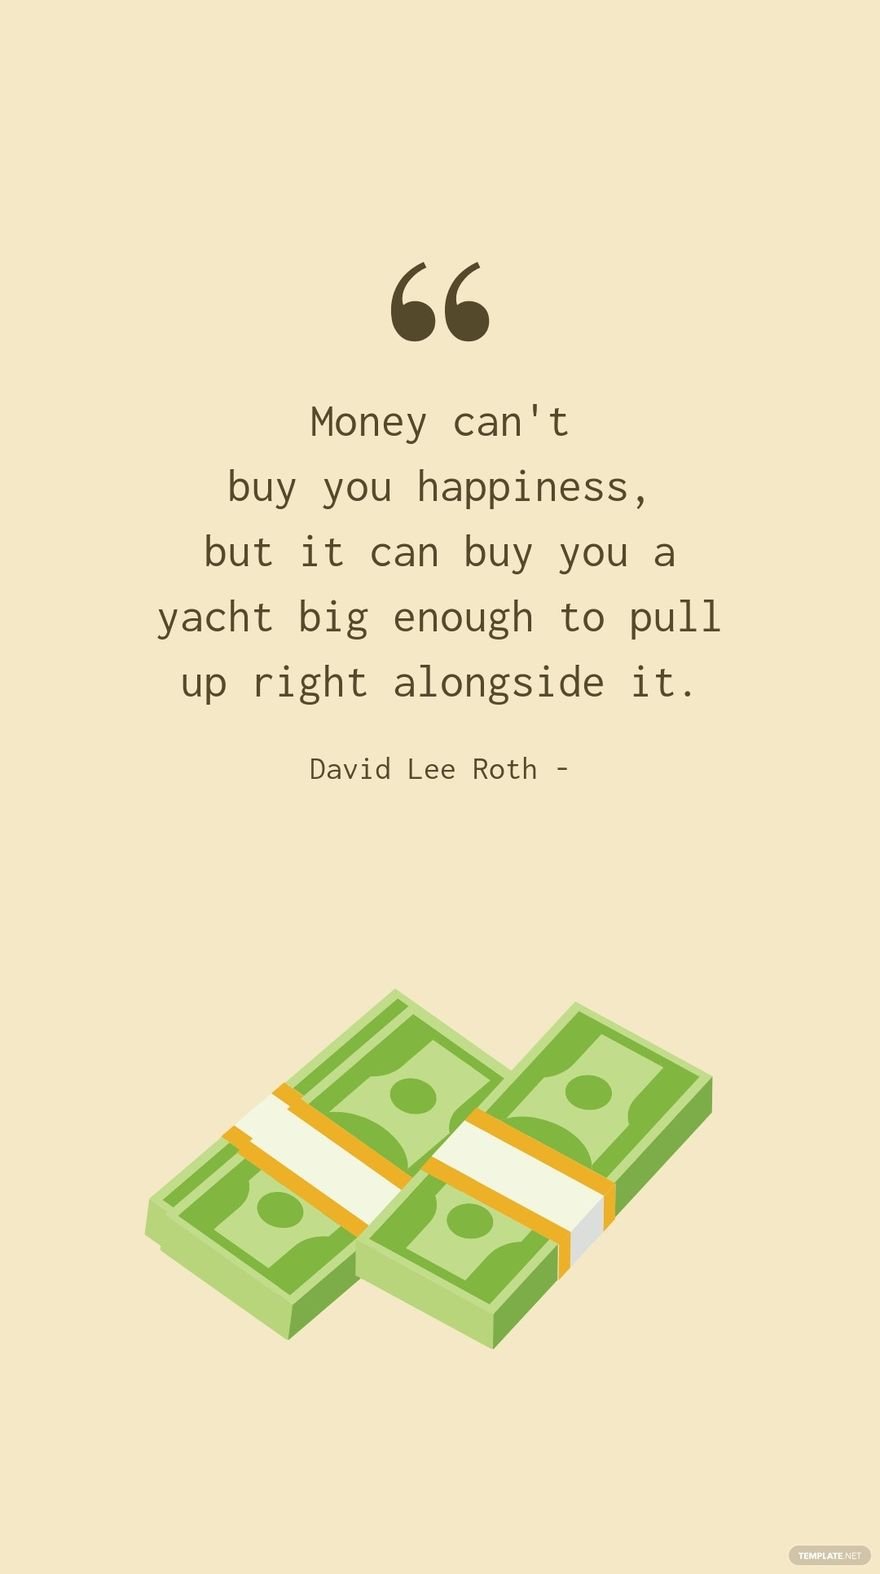 David Lee Roth - Money can't buy you happiness, but it can buy you a yacht big enough to pull up right alongside it.